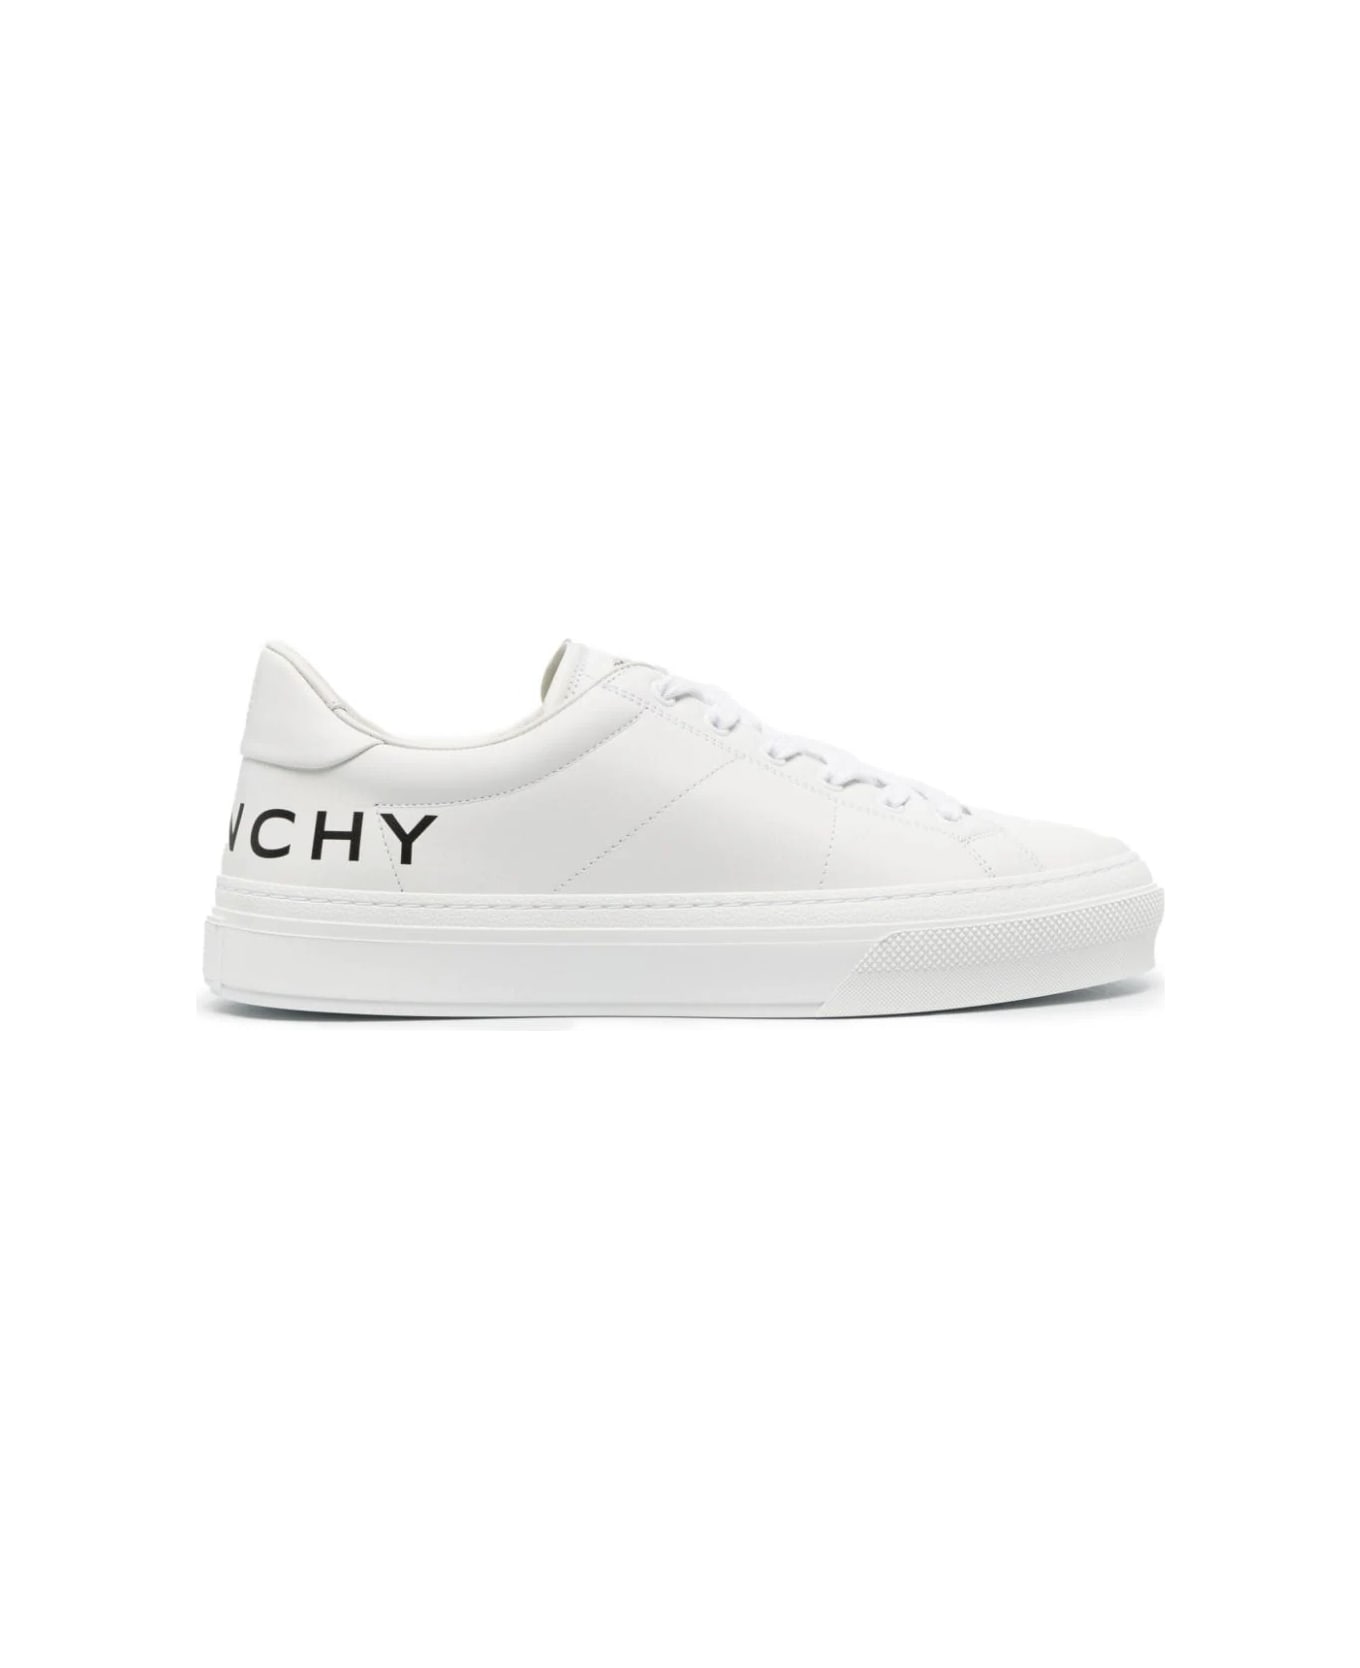 Givenchy Stone Grey City Sport Sneakers With Printed Logo - White